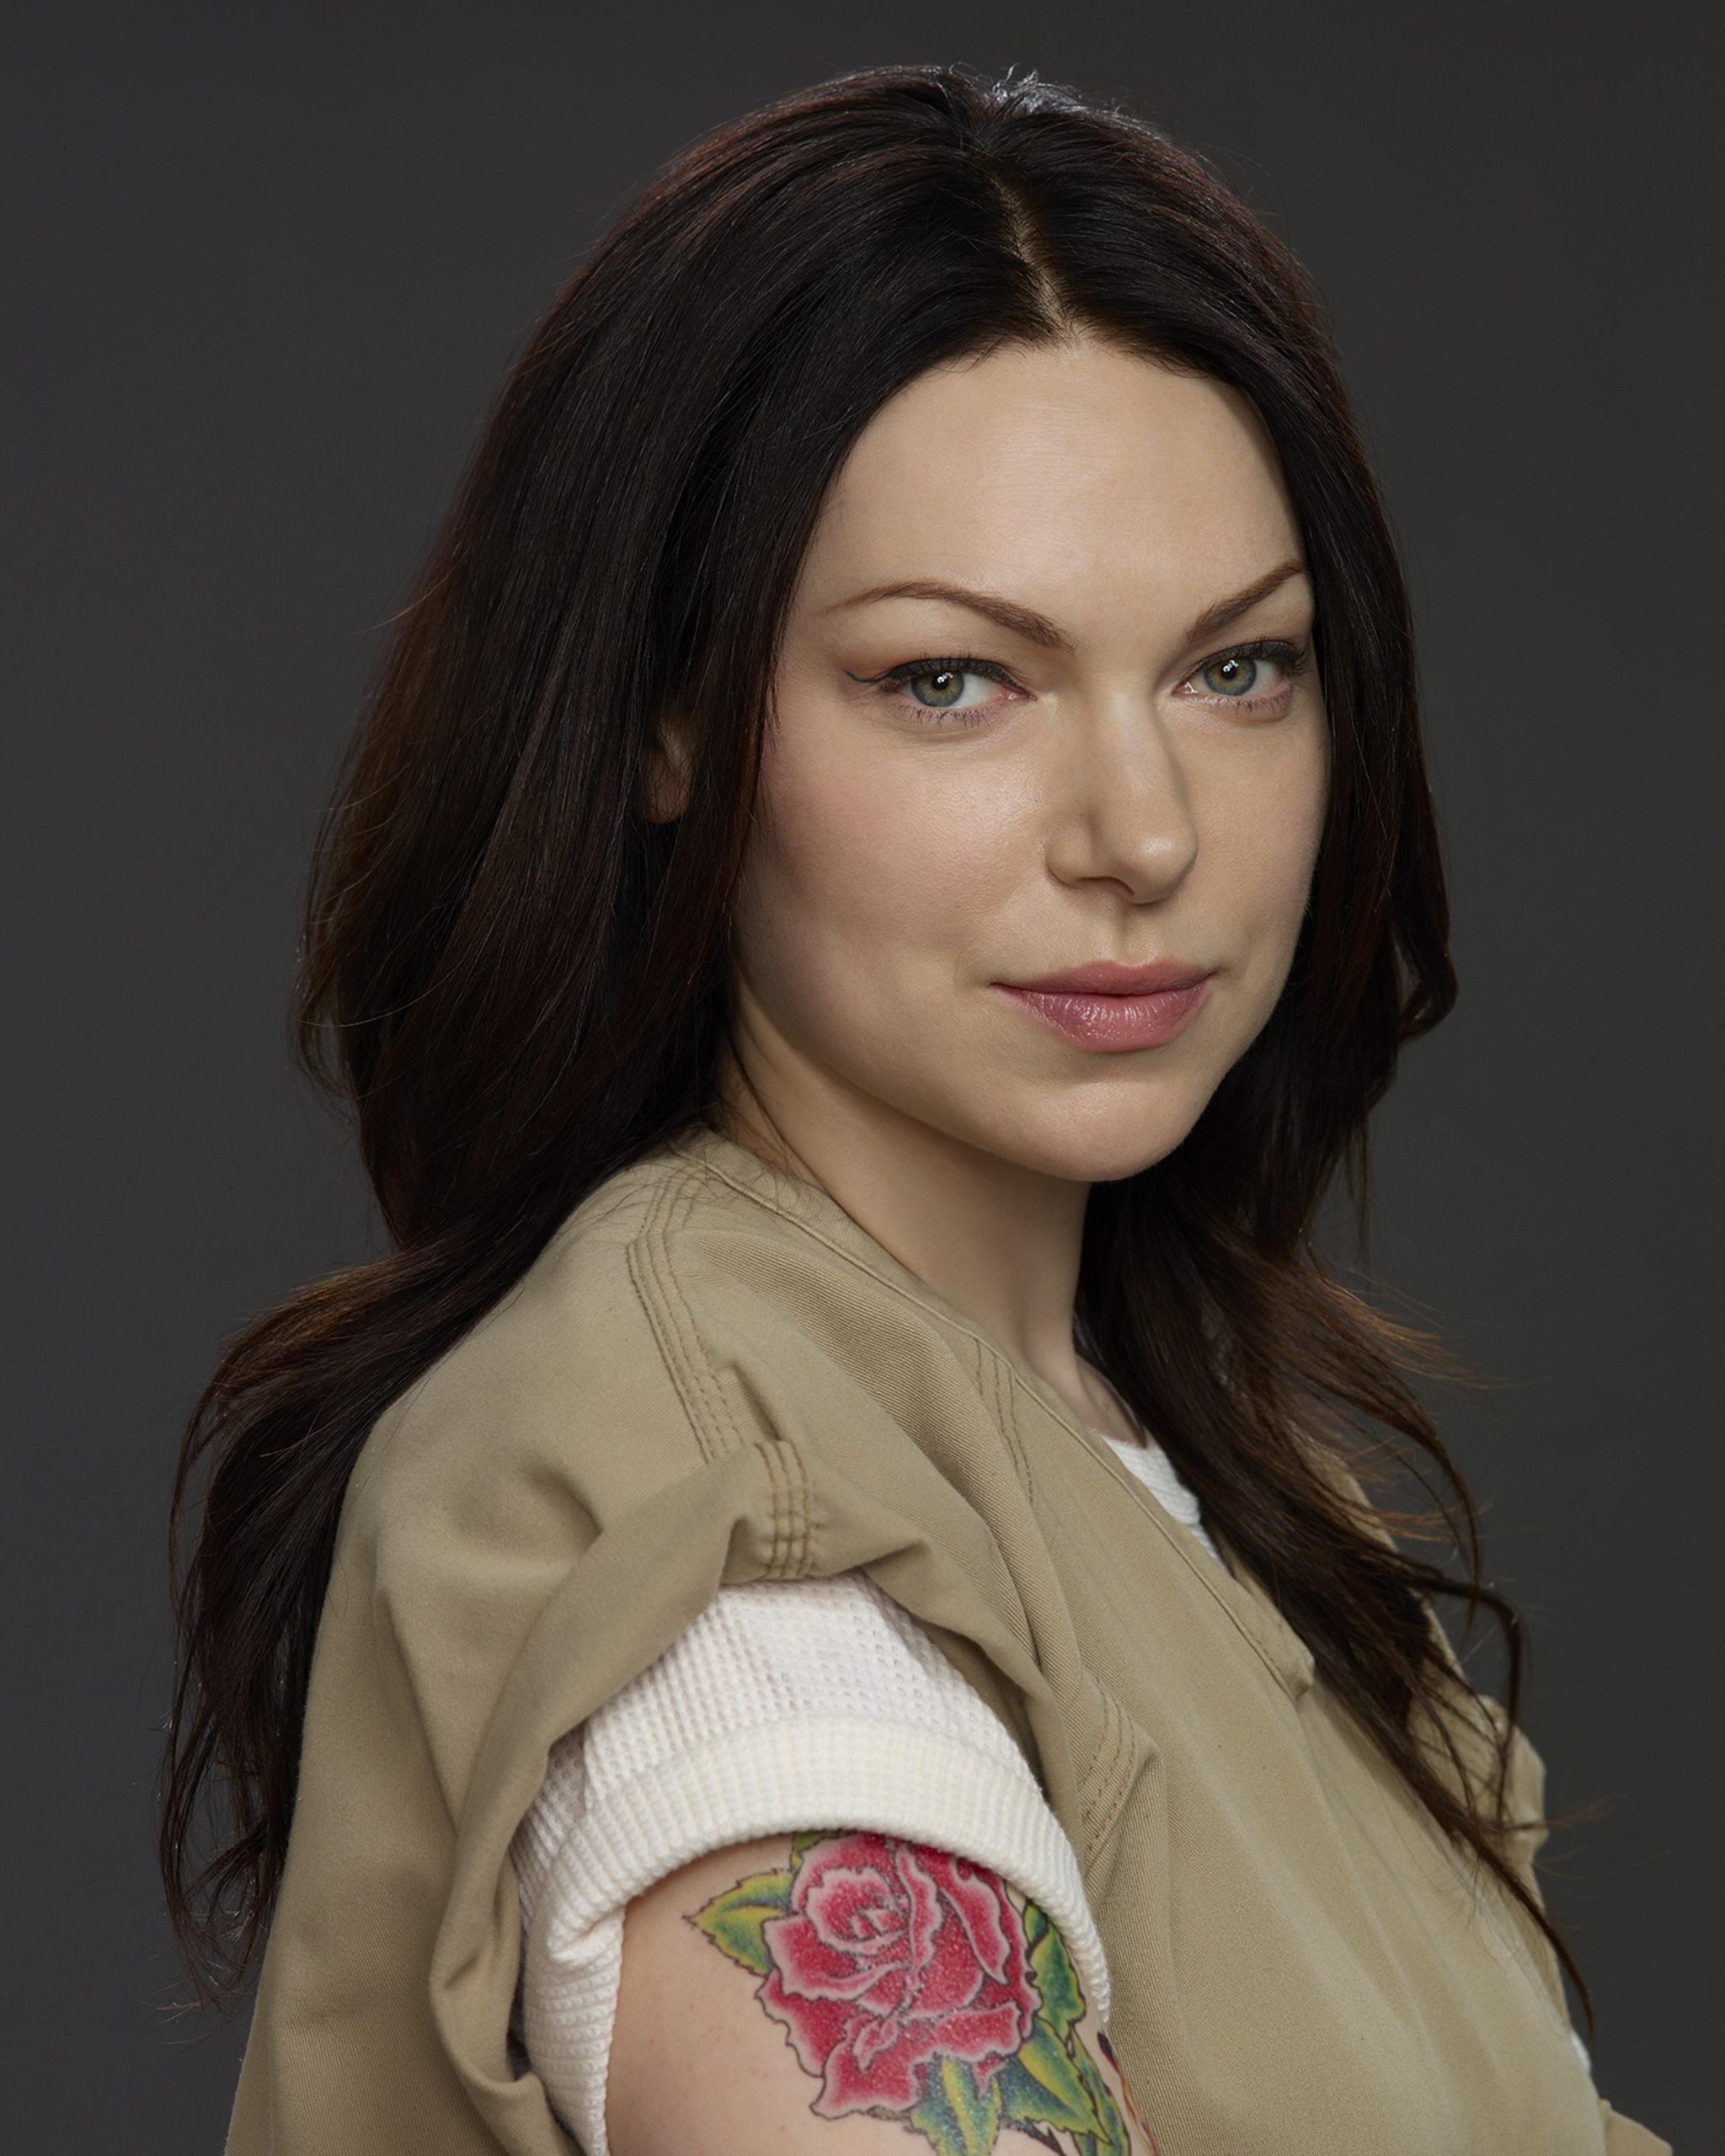 70+ Hot Pictures of Laura Prepon from Orange Is The New Black Will Get You Hot Under Collars 22